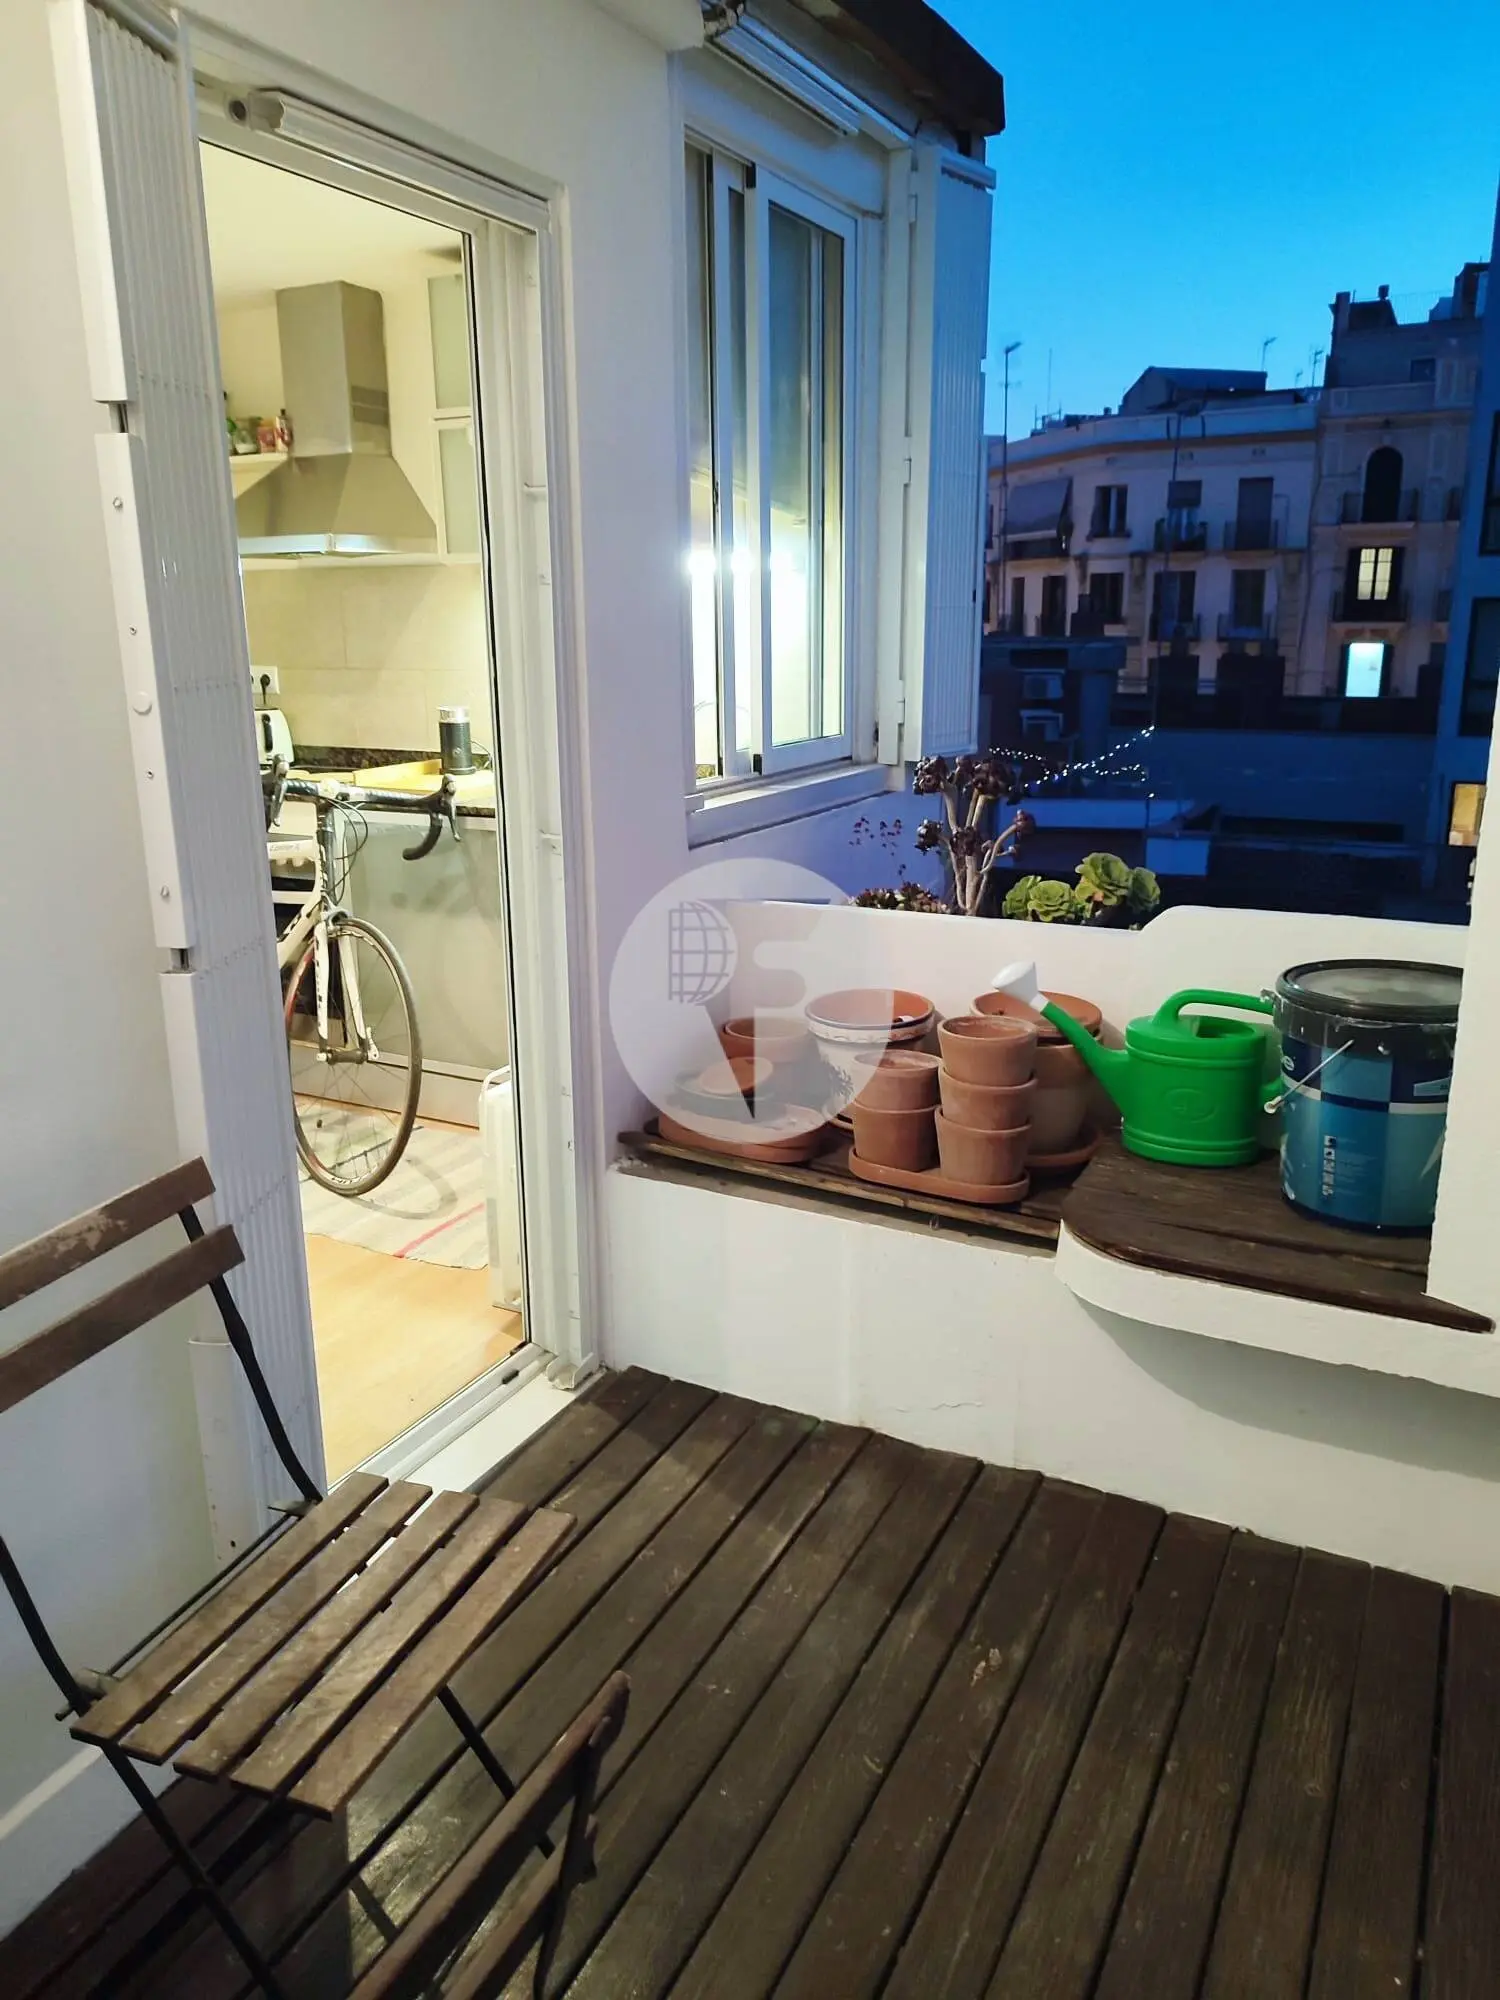 Magnificent apartment located in the Poble Sec neighborhood. 19